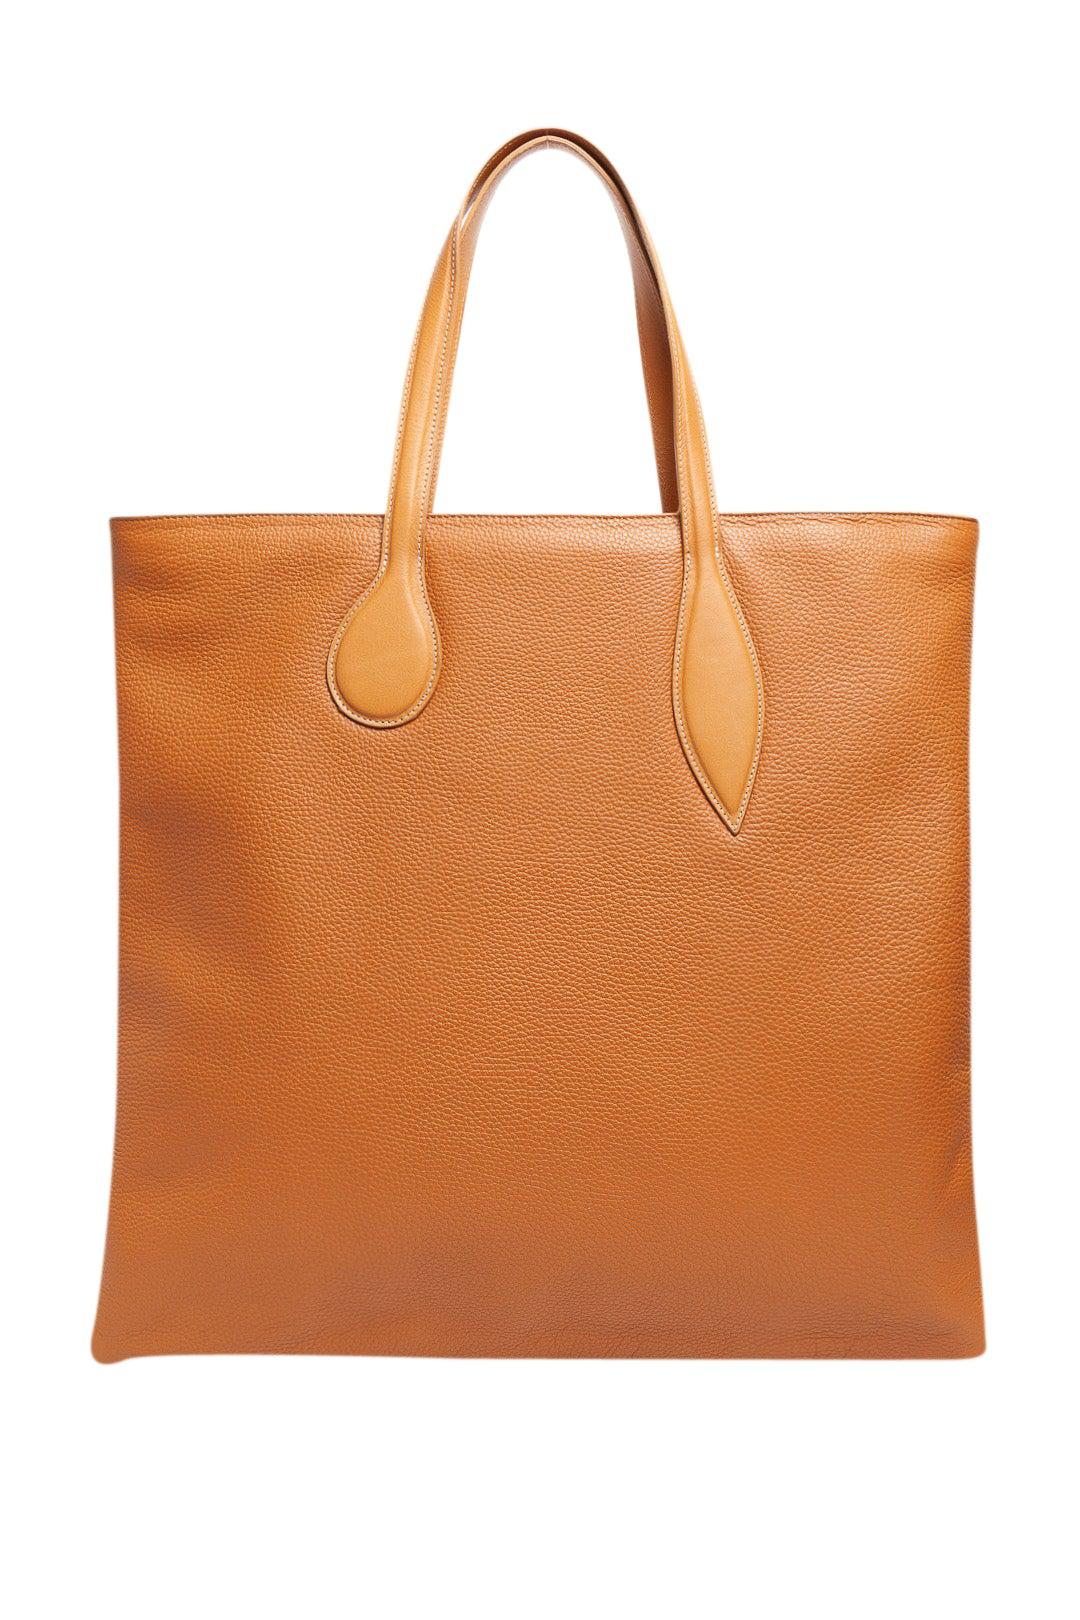 LITTLE LIFFNER-Leather tote bag-CR3579-2-dgallerystore